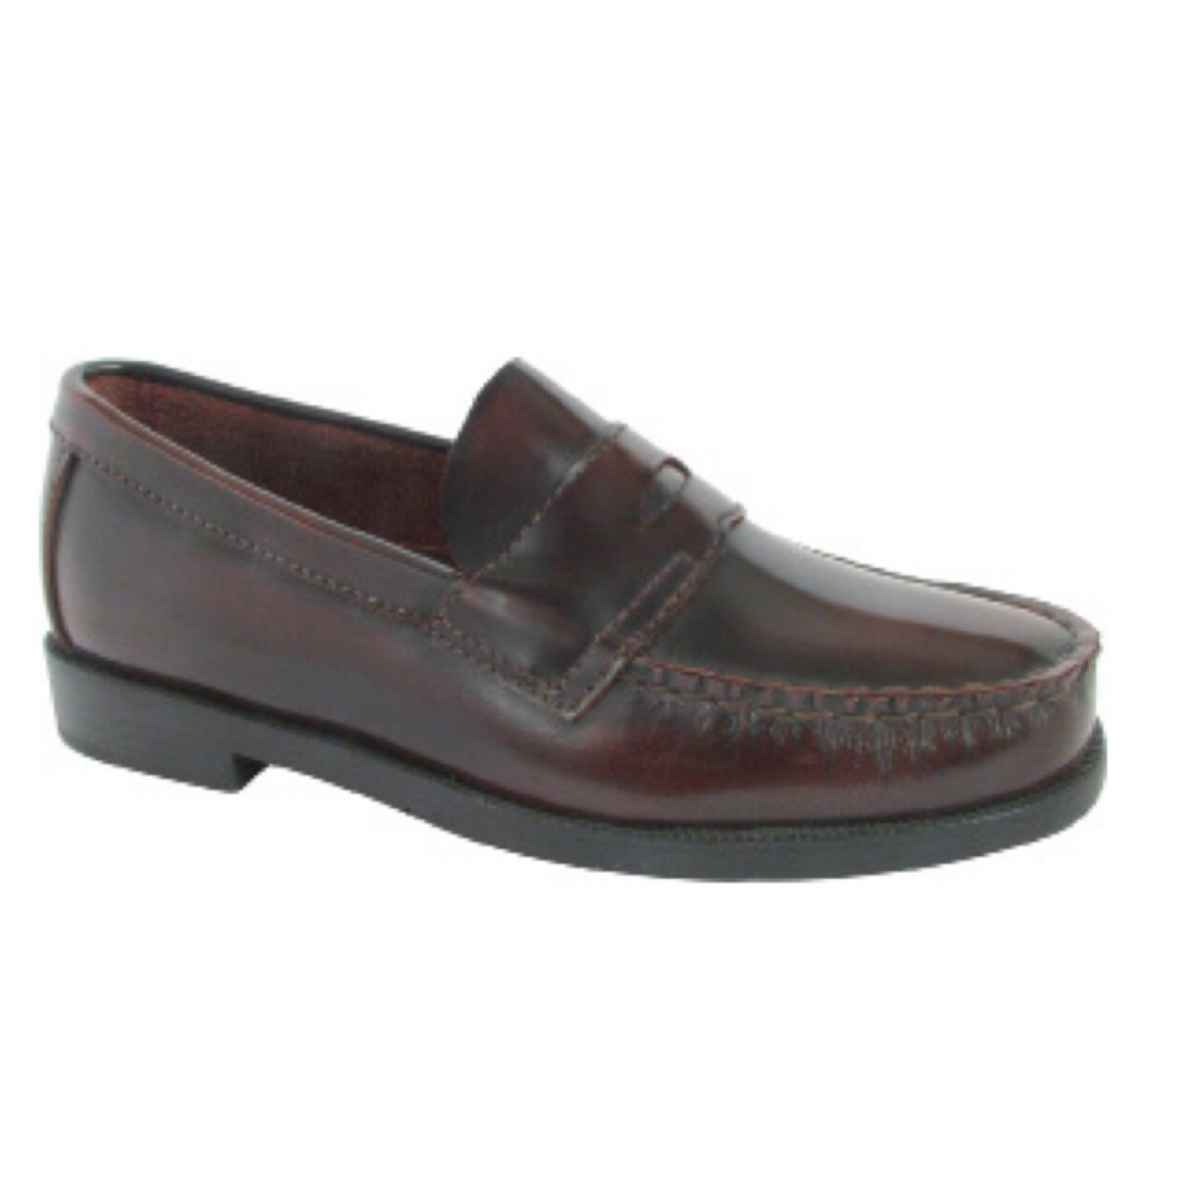 Carlos Men's Burgundy Leather Penny Loafers - Kids Shoe Box